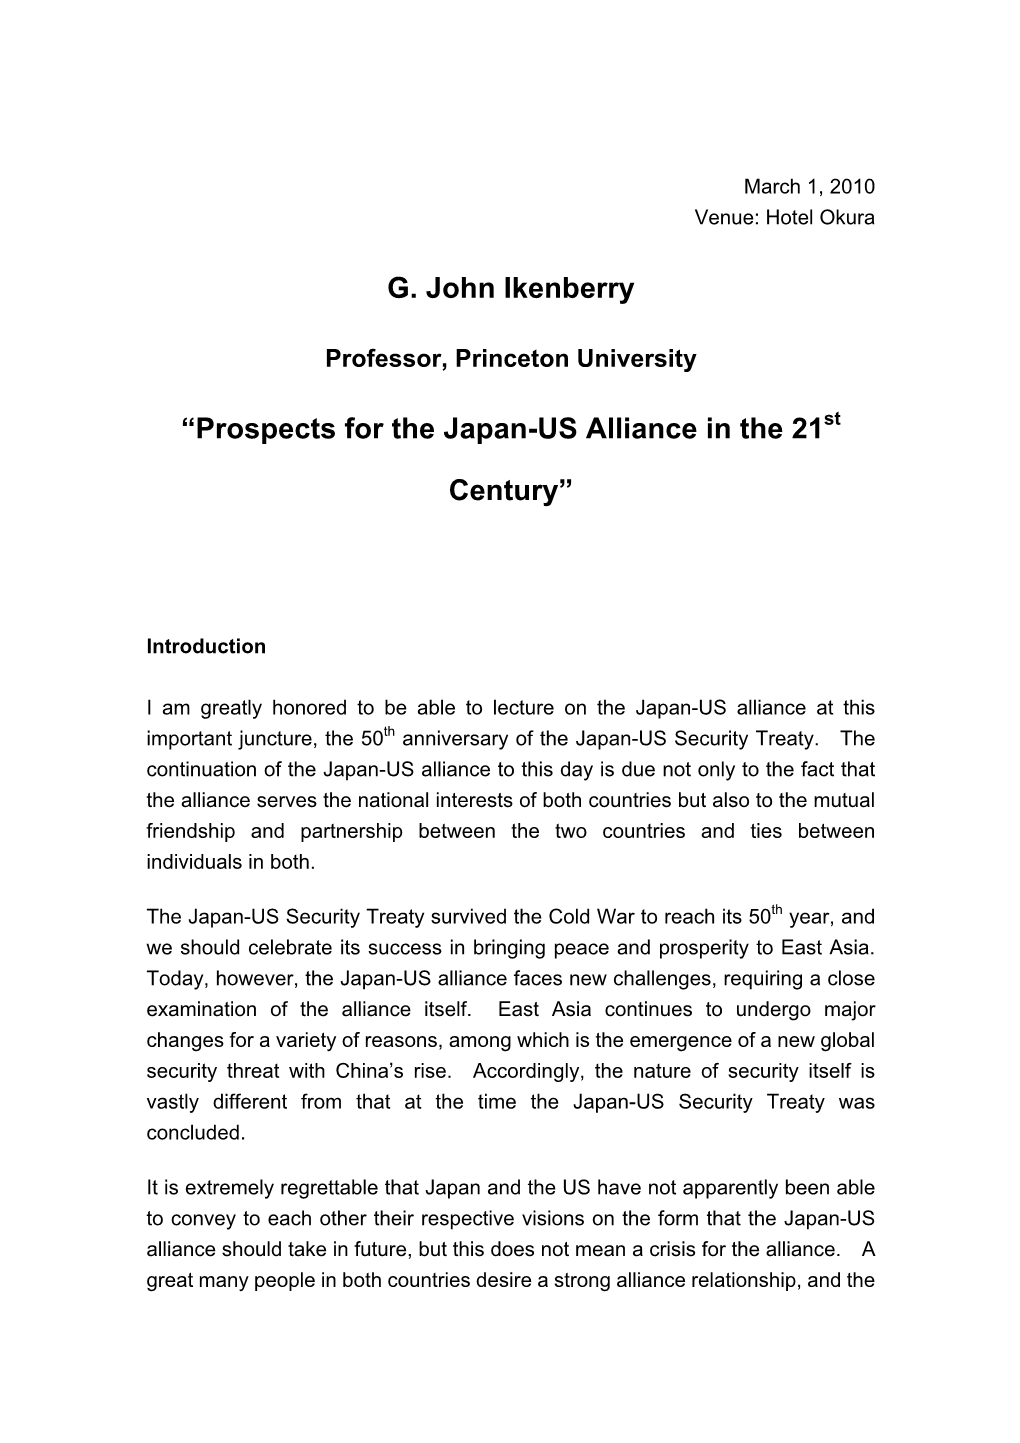 G. John Ikenberry “Prospects for the Japan-US Alliance in the 21 Century”